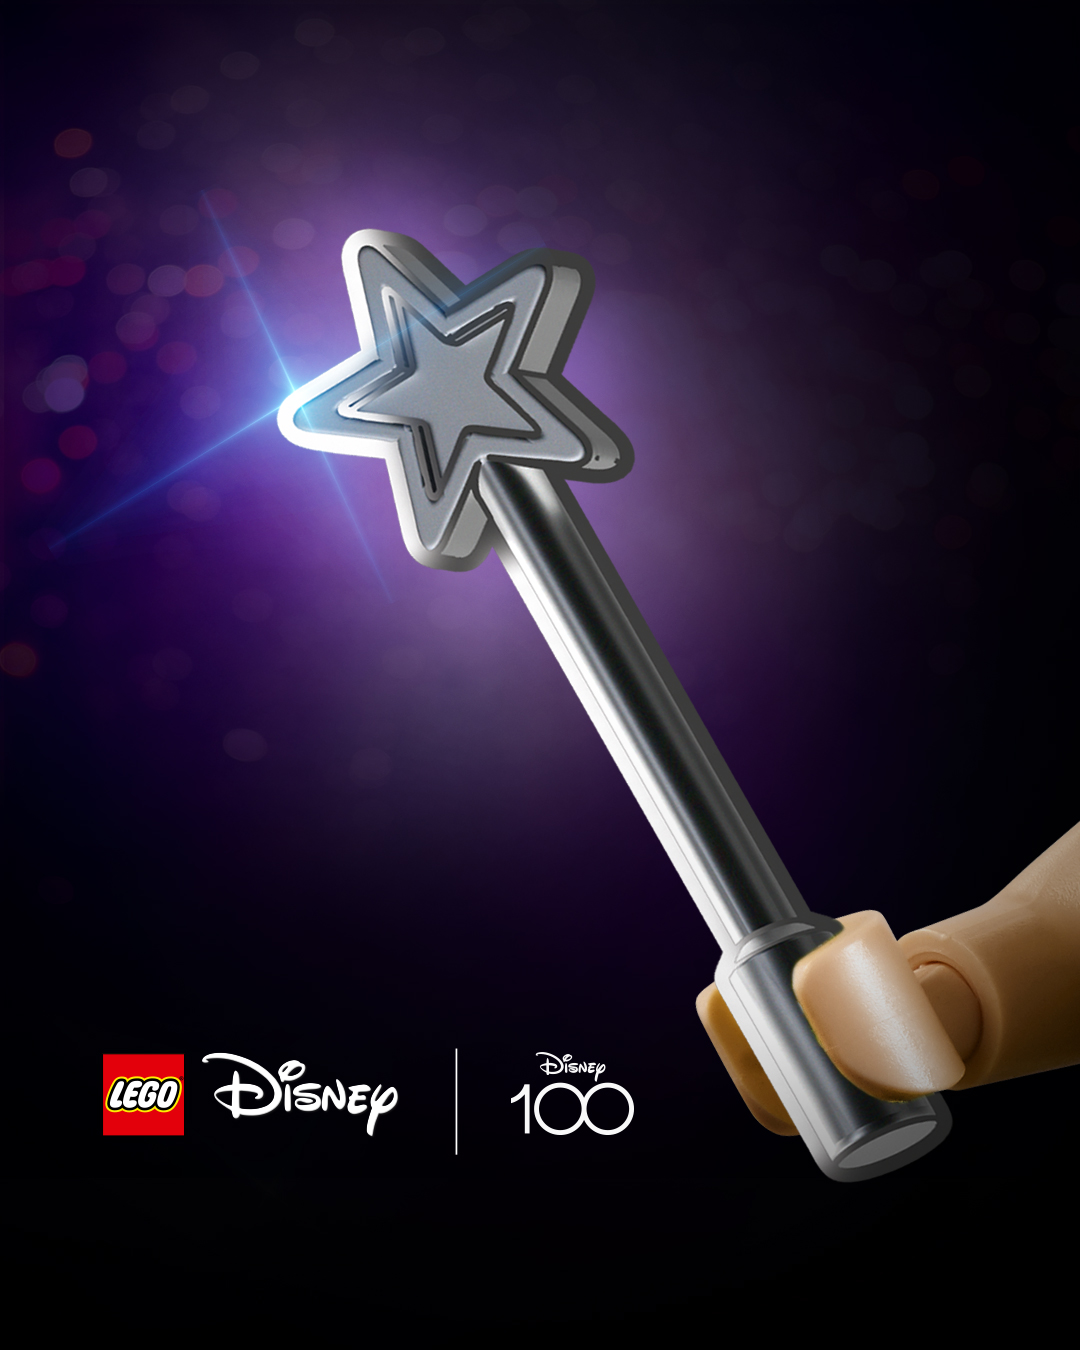 Graphic featuring a LEGO holding up a LEGO wand with logos for LEGO, Disney and Disney100